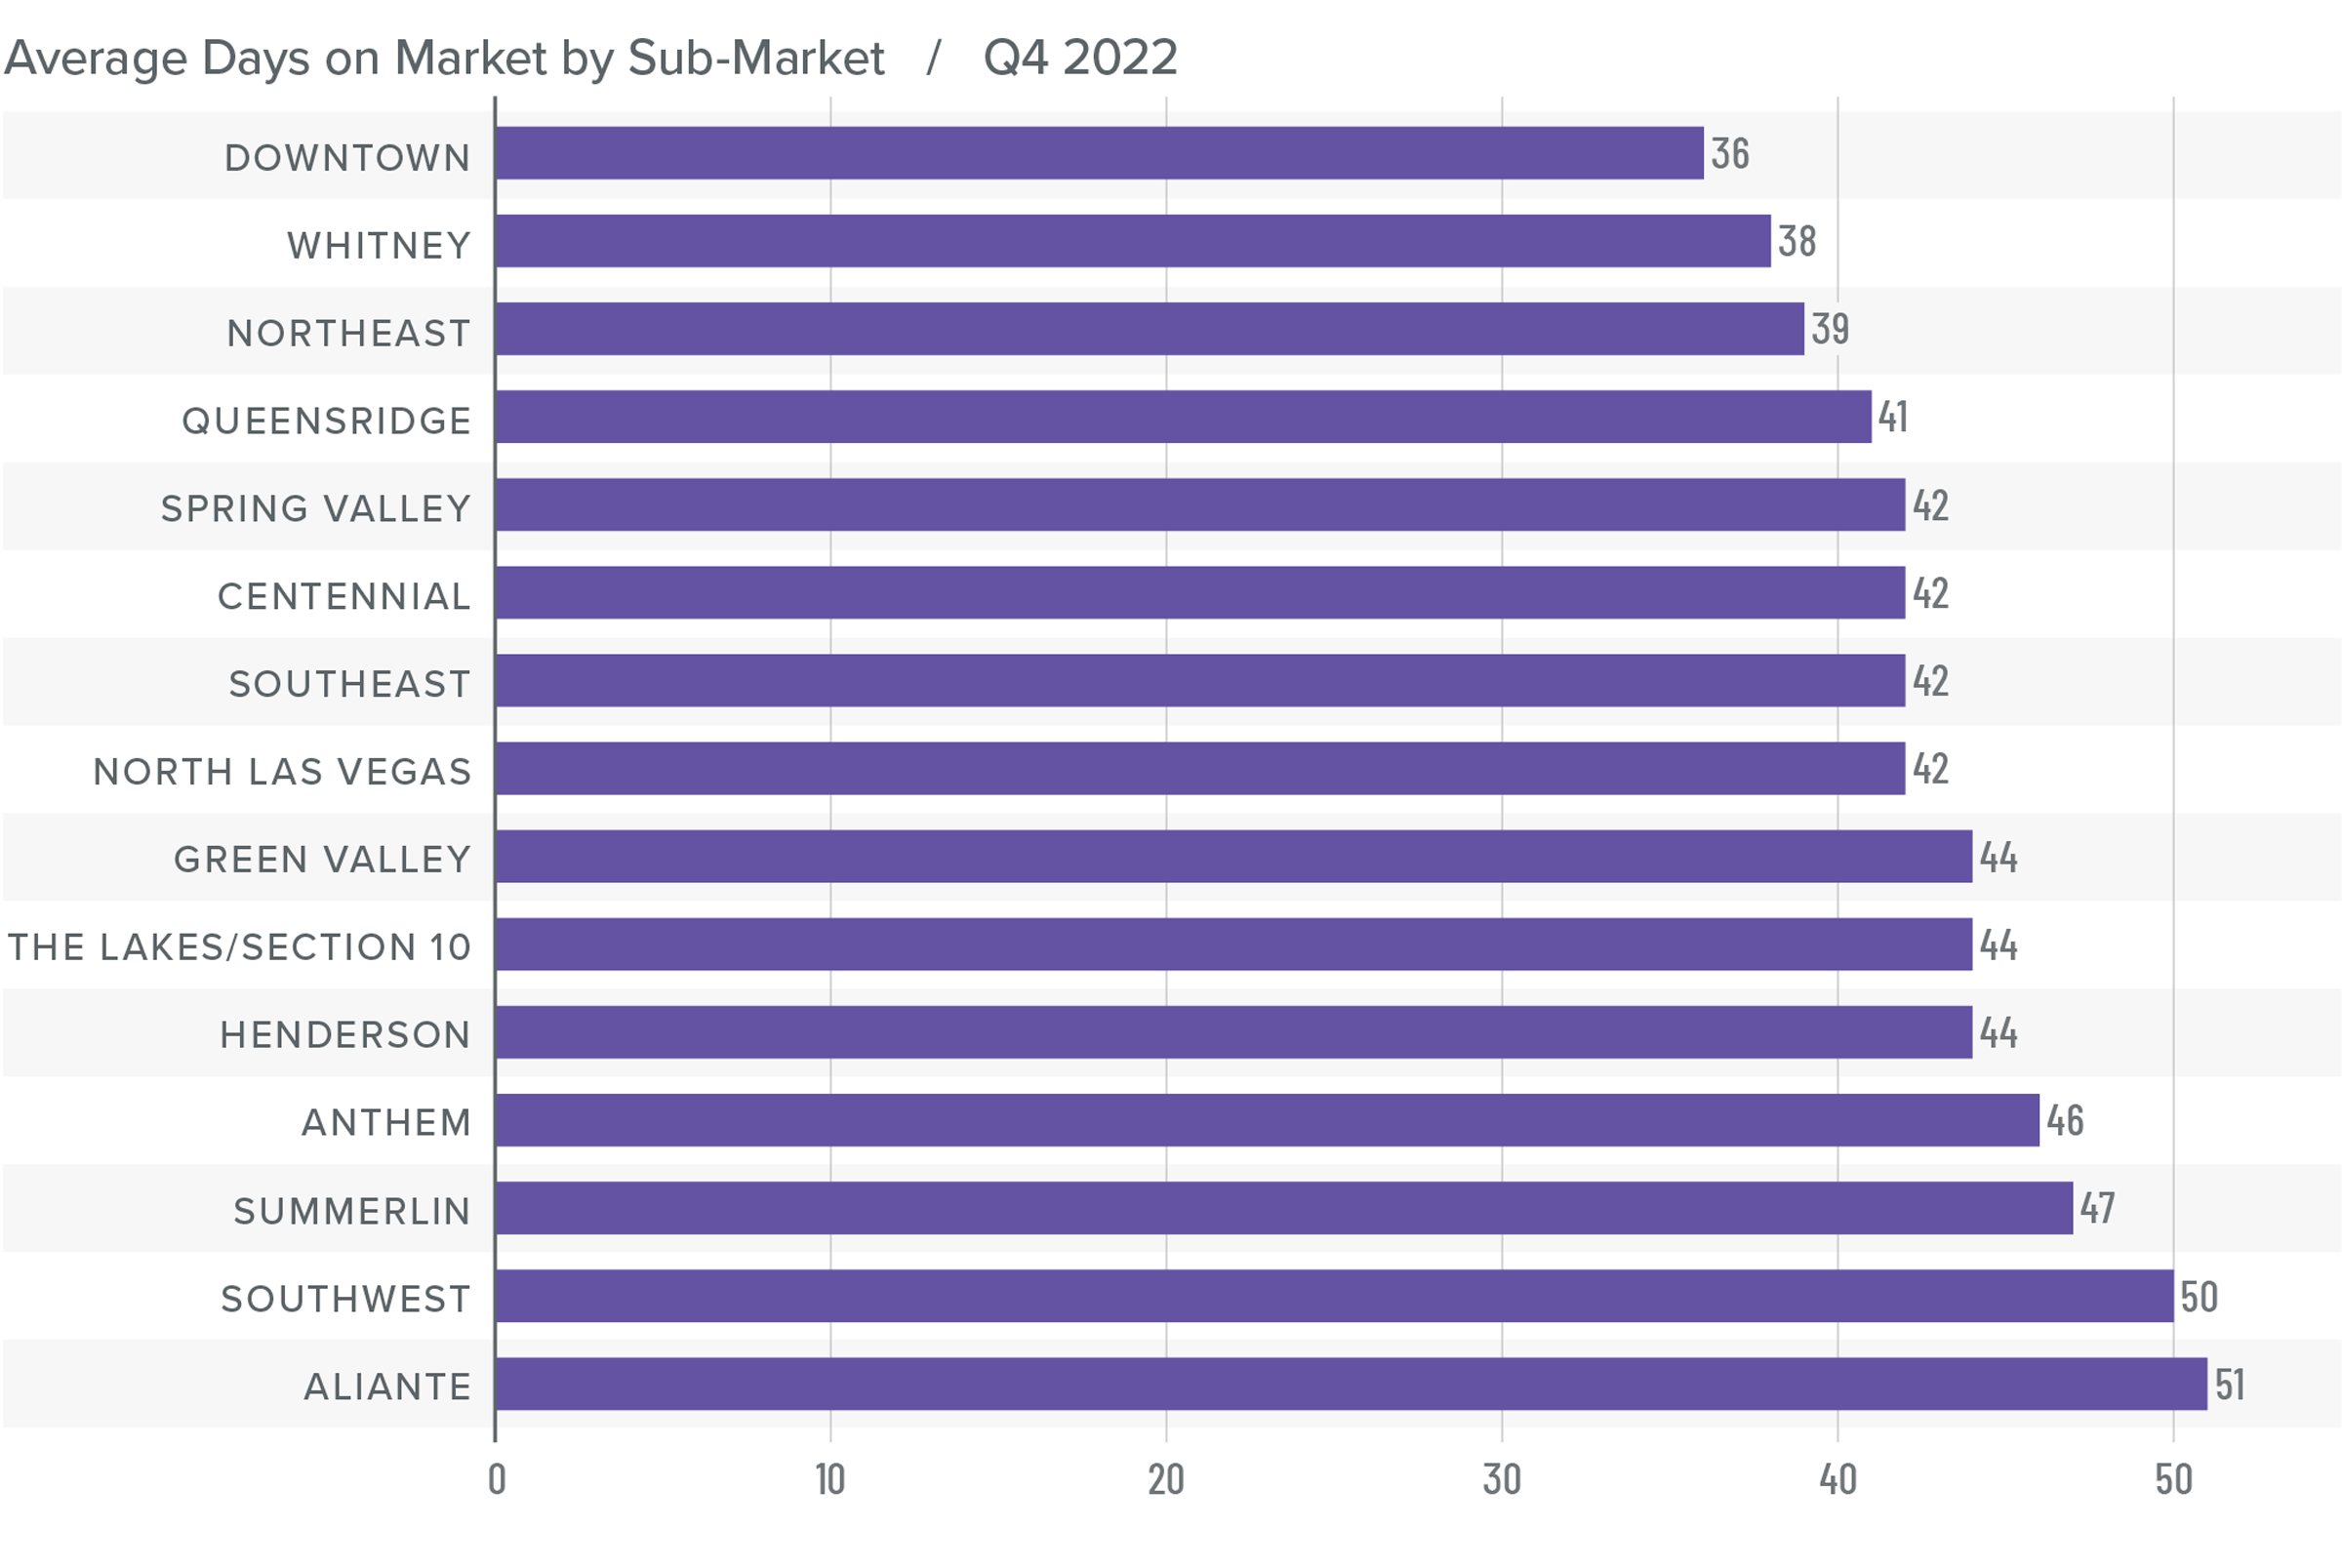 A bar graph showing the average days on market for homes in various sub-markets in Nevada for Q4 2022. Downtown County has the lowest DOM at 36, followed by Whitney at 38, Davis at 39, Queensridge at 41, Spring Valley, Centennial, Southeast, and North Las Vegas at 42, Green Valley, The Lakes/Section 10, and Henderson at 44, Anthem at 46, Summerlin at 47, Southwest at 50, and Aliante at 51.